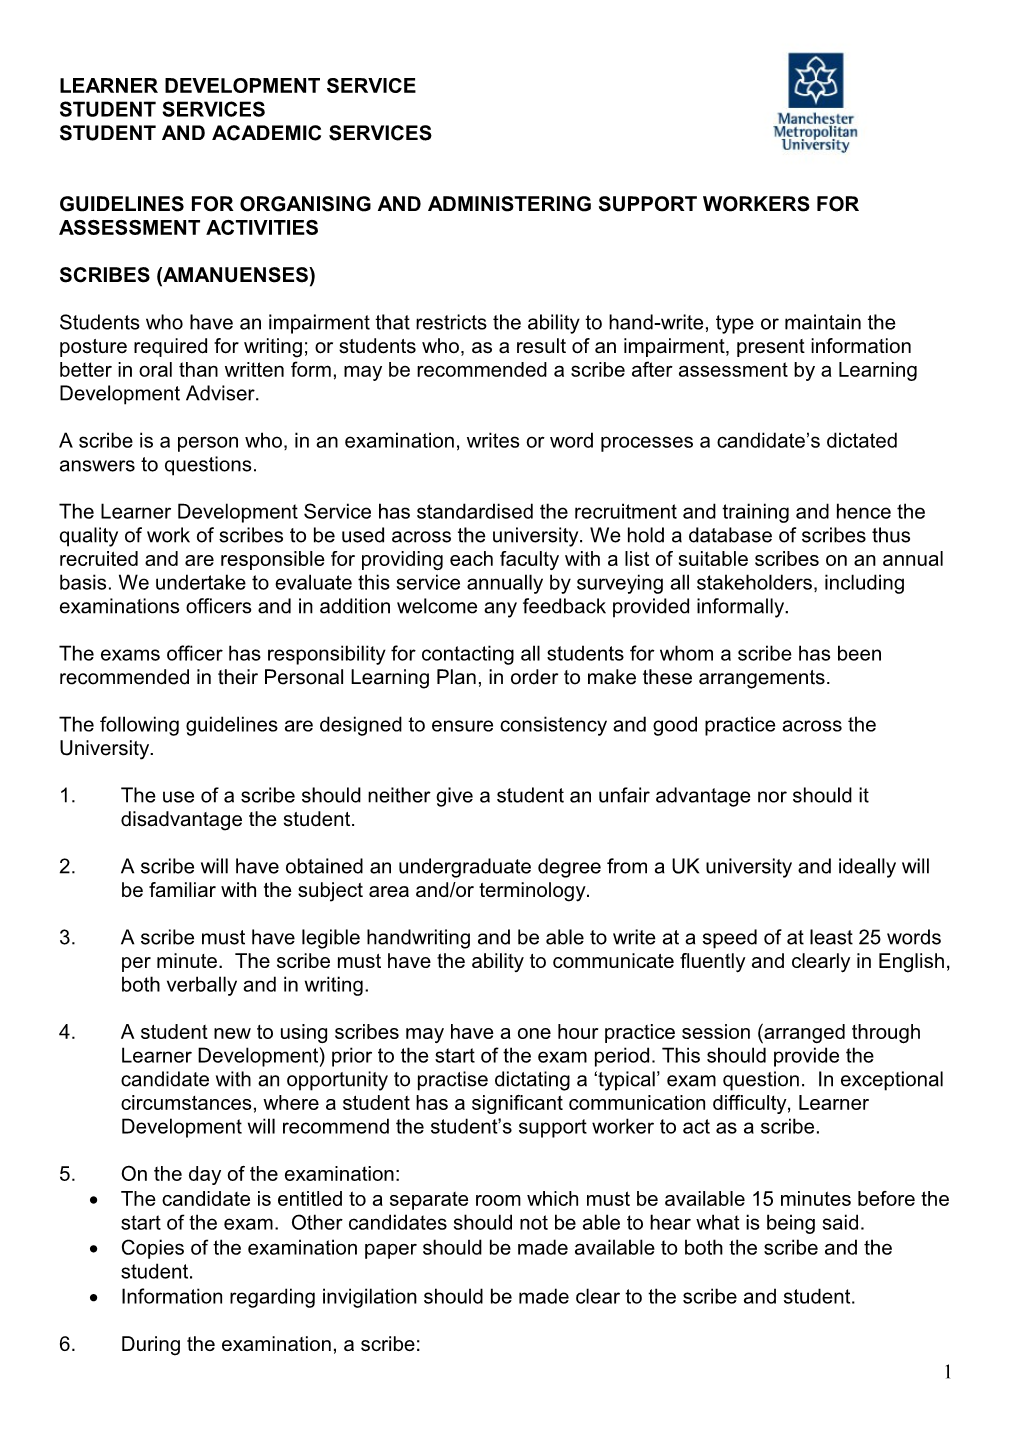 Guidelines for Organising and Administering Support Workers for Assessment Activities